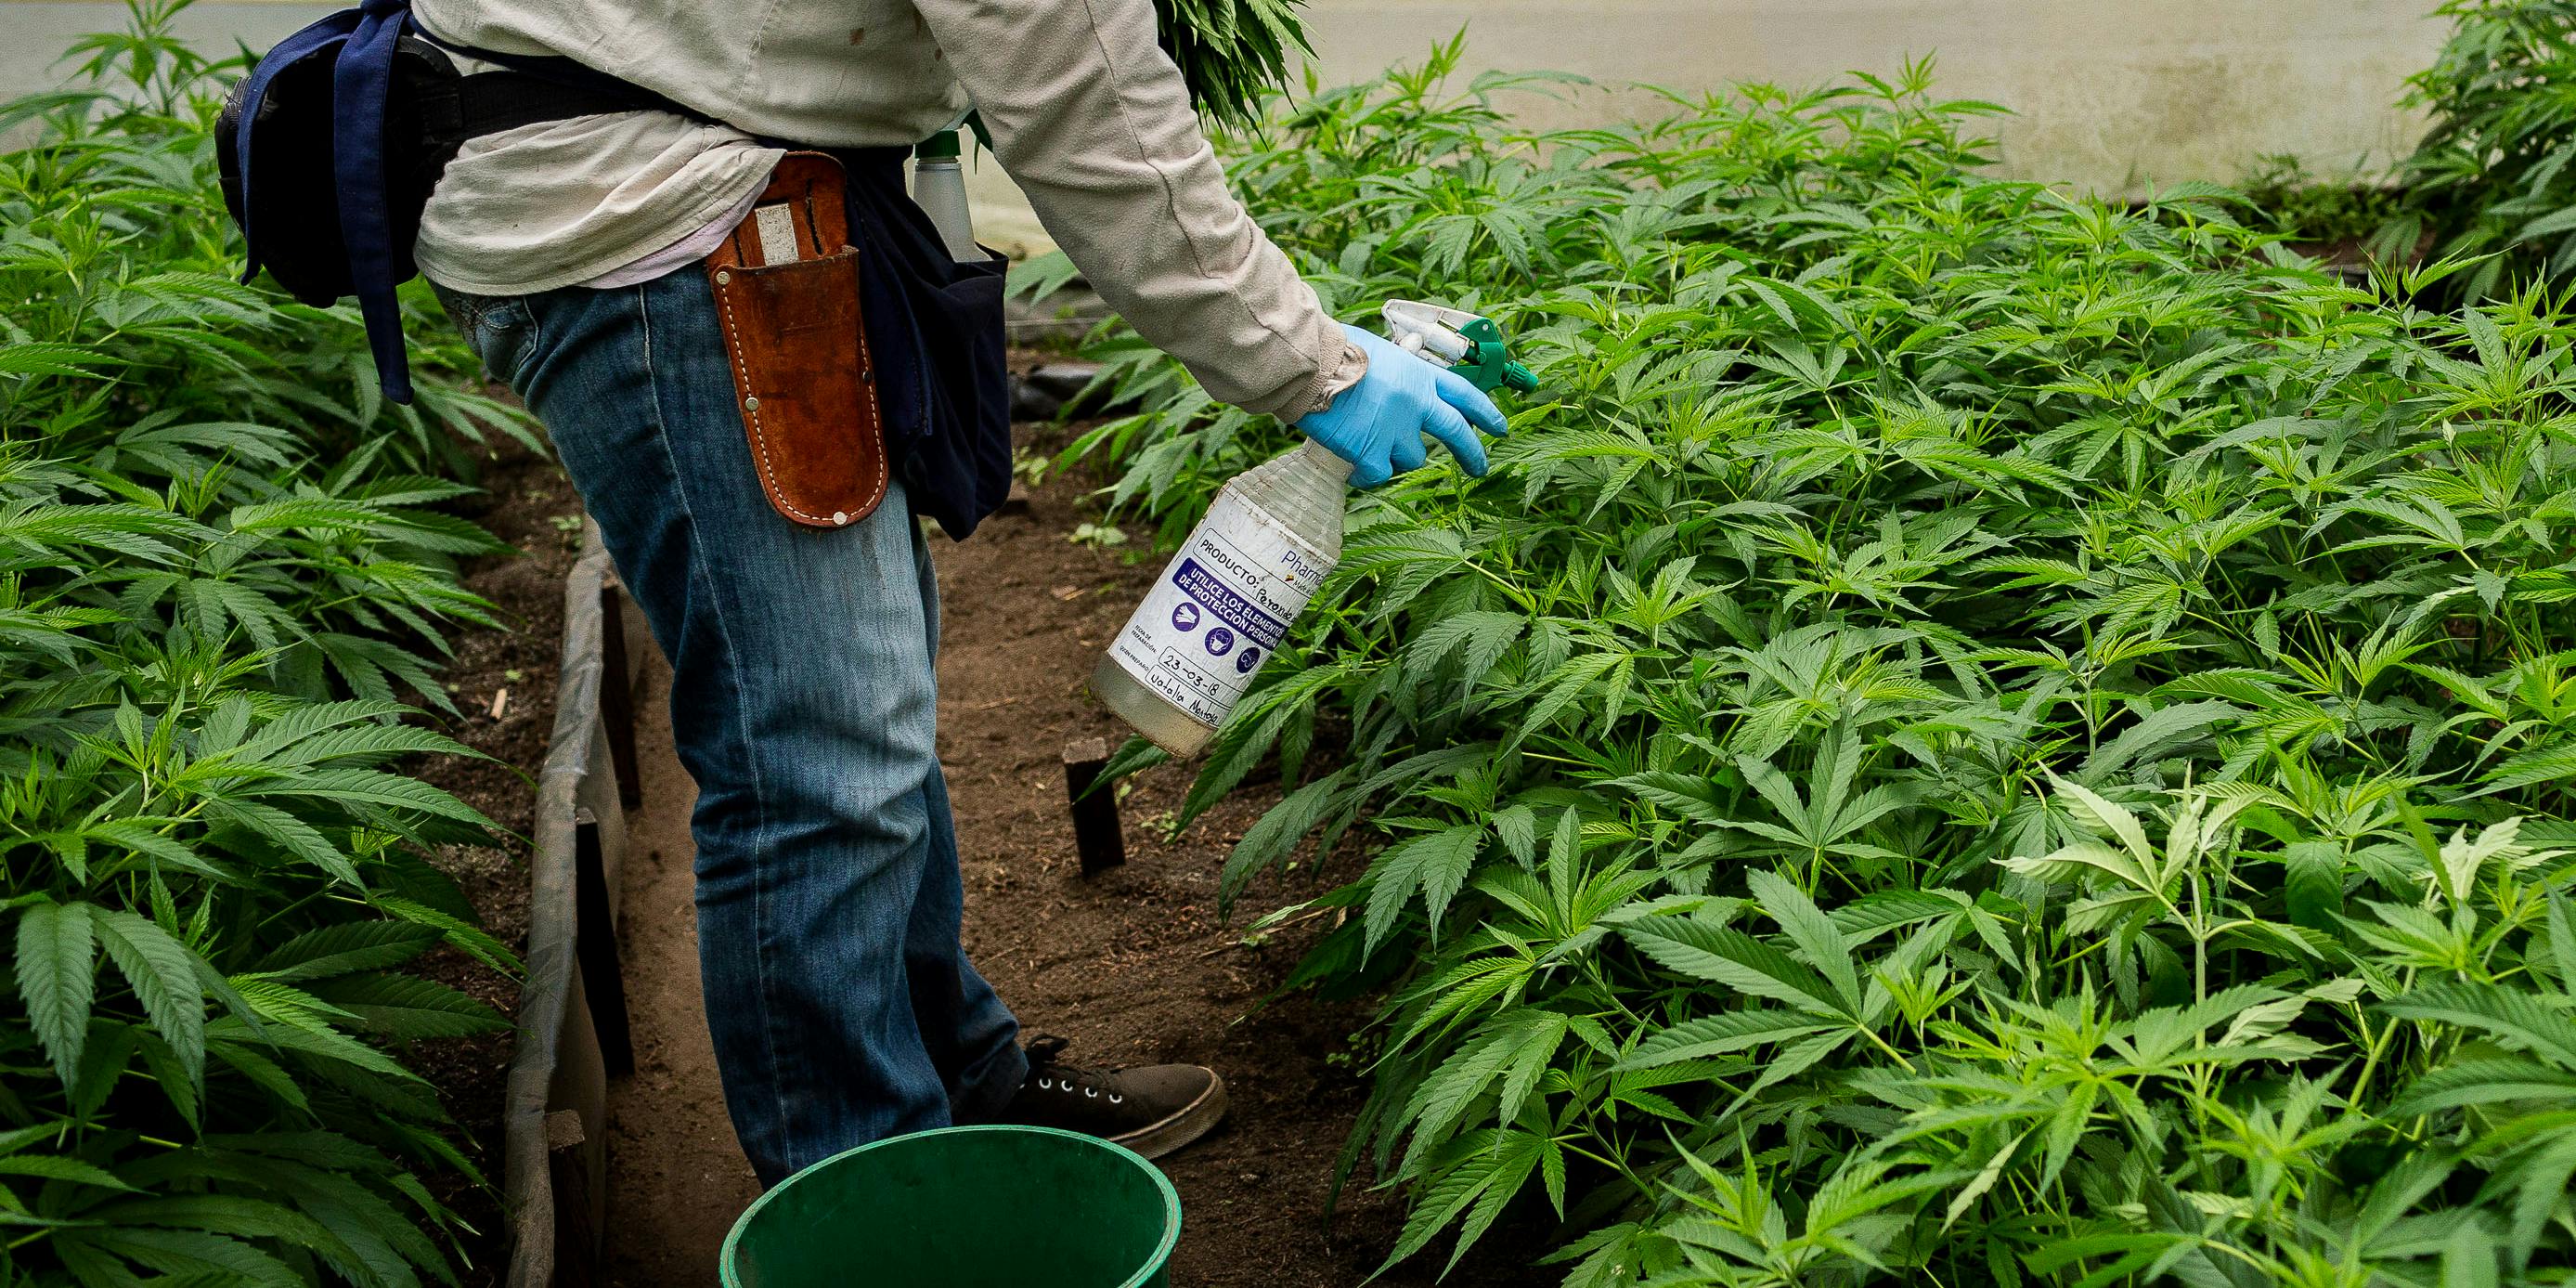 An employee sprays marijuana plants at the PharmaCielo Ltd. facility in Rionegro, Colombia, on Thursday, April 26, 2018. Natural pesticide use on cannabis is growing in popularity.